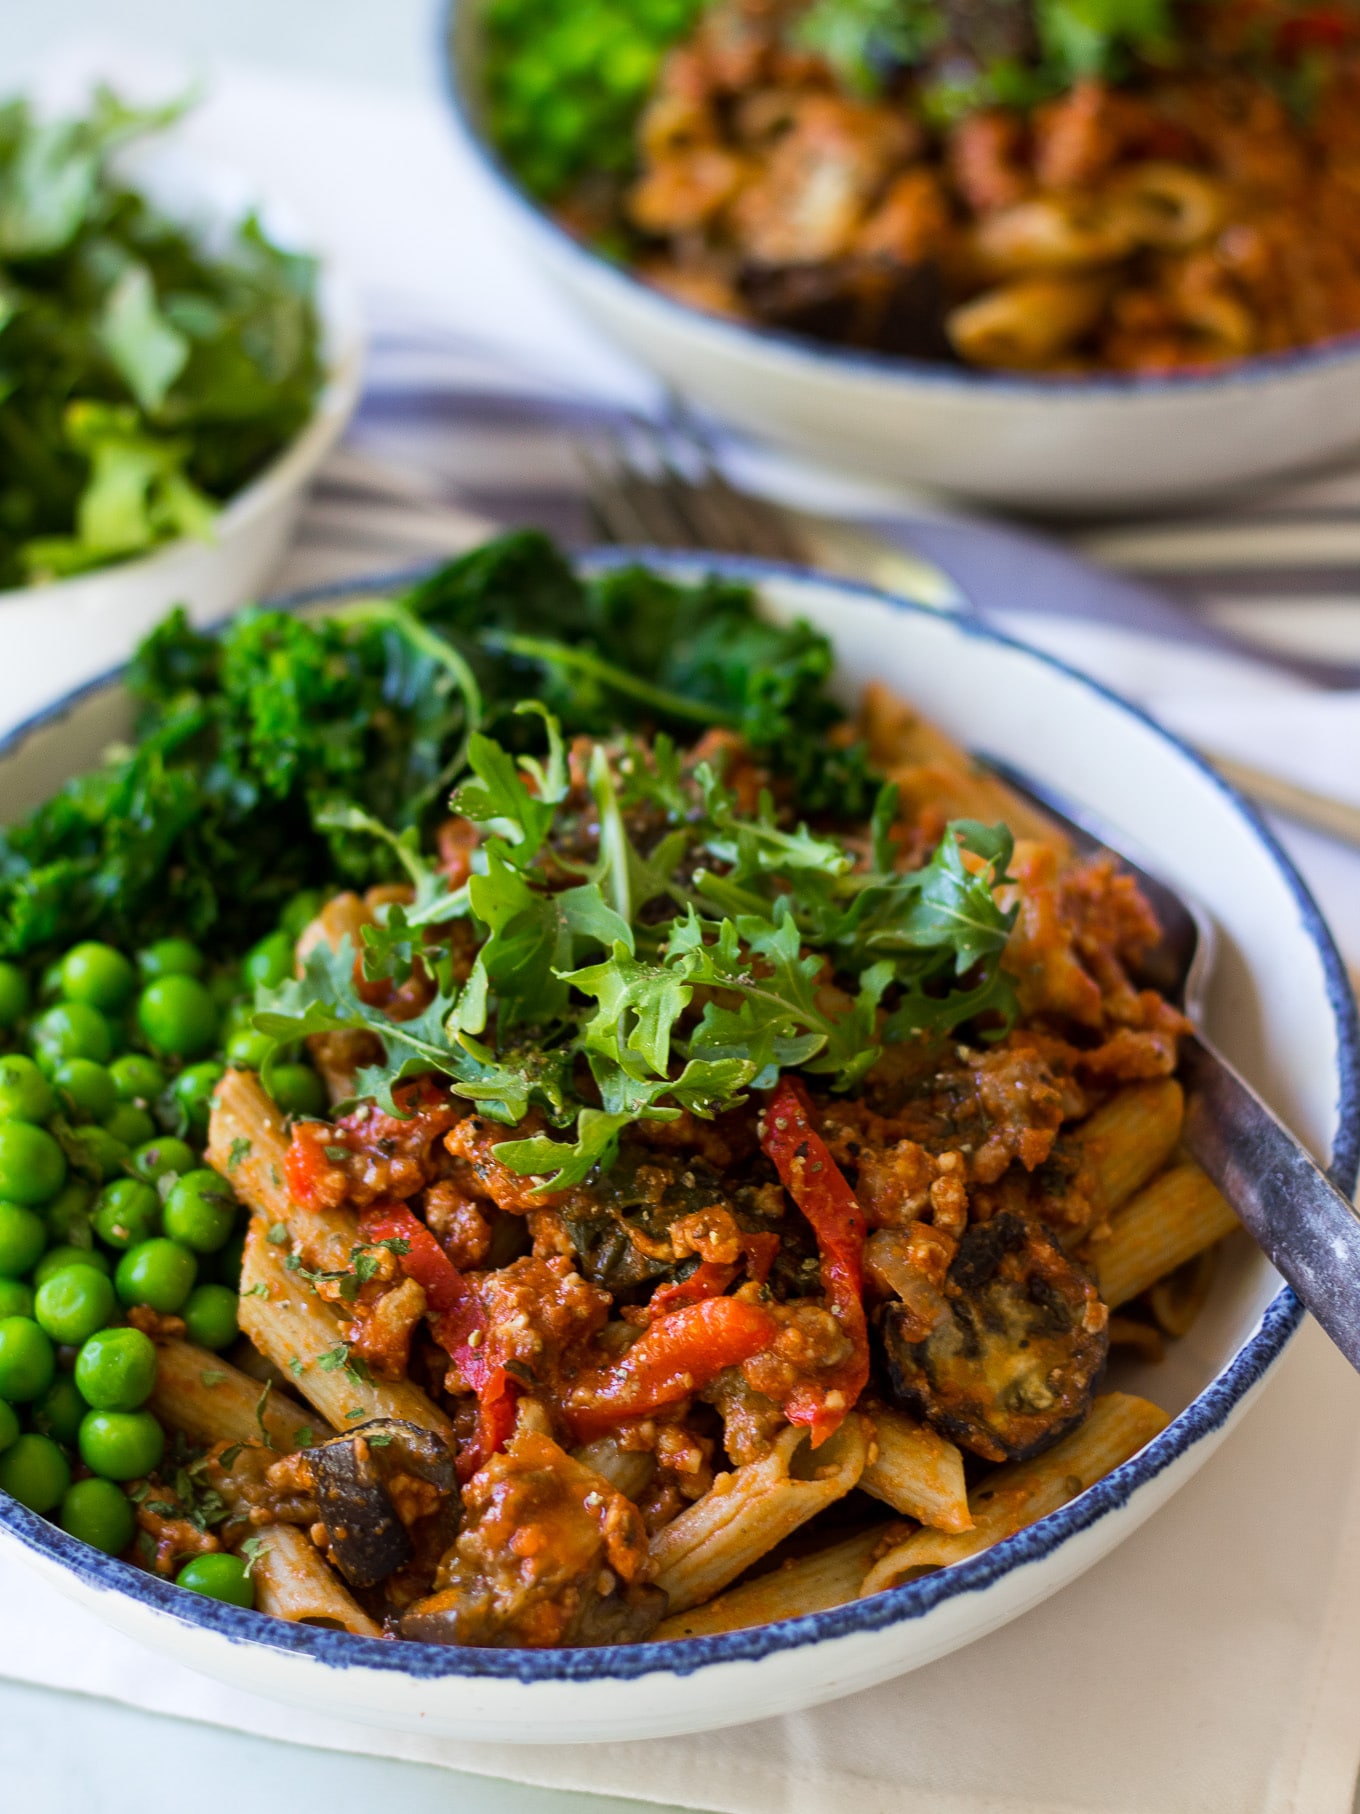 Roast Eggplant and Kale Bolognese is a hearty, healthy meal that's easy to prepare and freezes well too. Gluten free and dairy free, a great sauce over gluten free pasta or spiralised veg for a #paleo option. #healthybolognese #glutenfreepasta